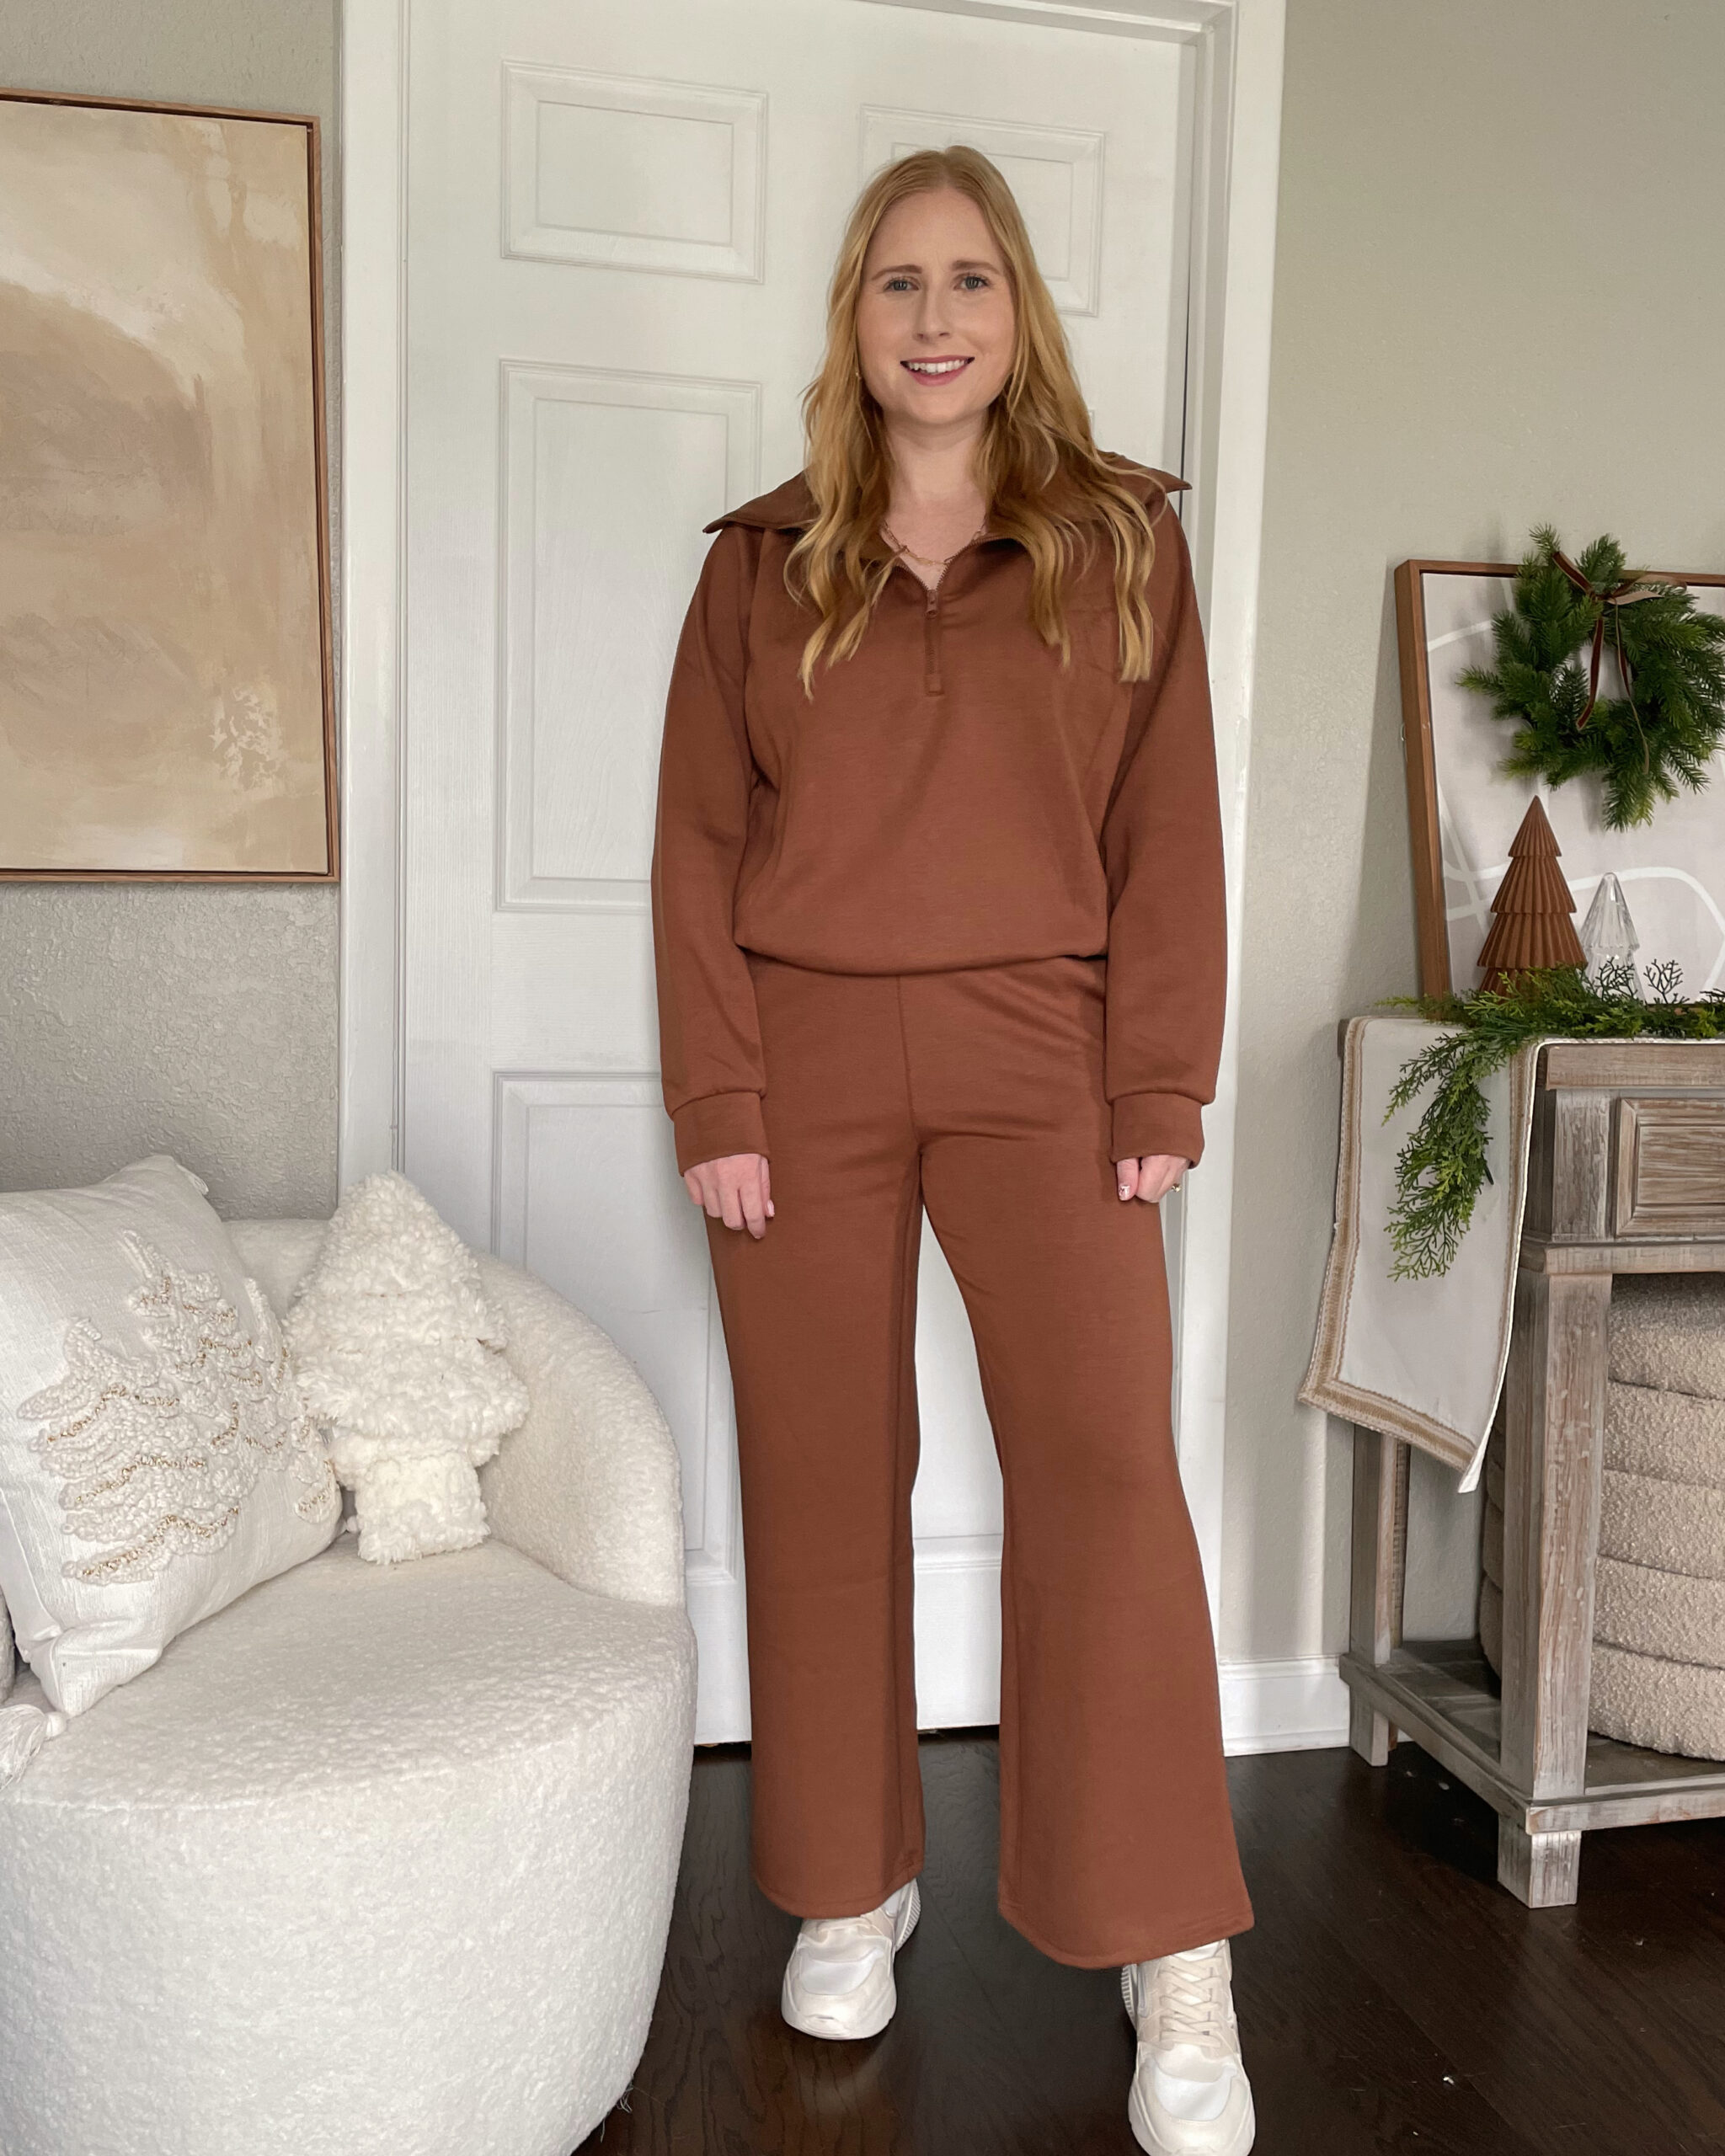 Amazon Lounge Set for a Casual Winter Outfit Idea